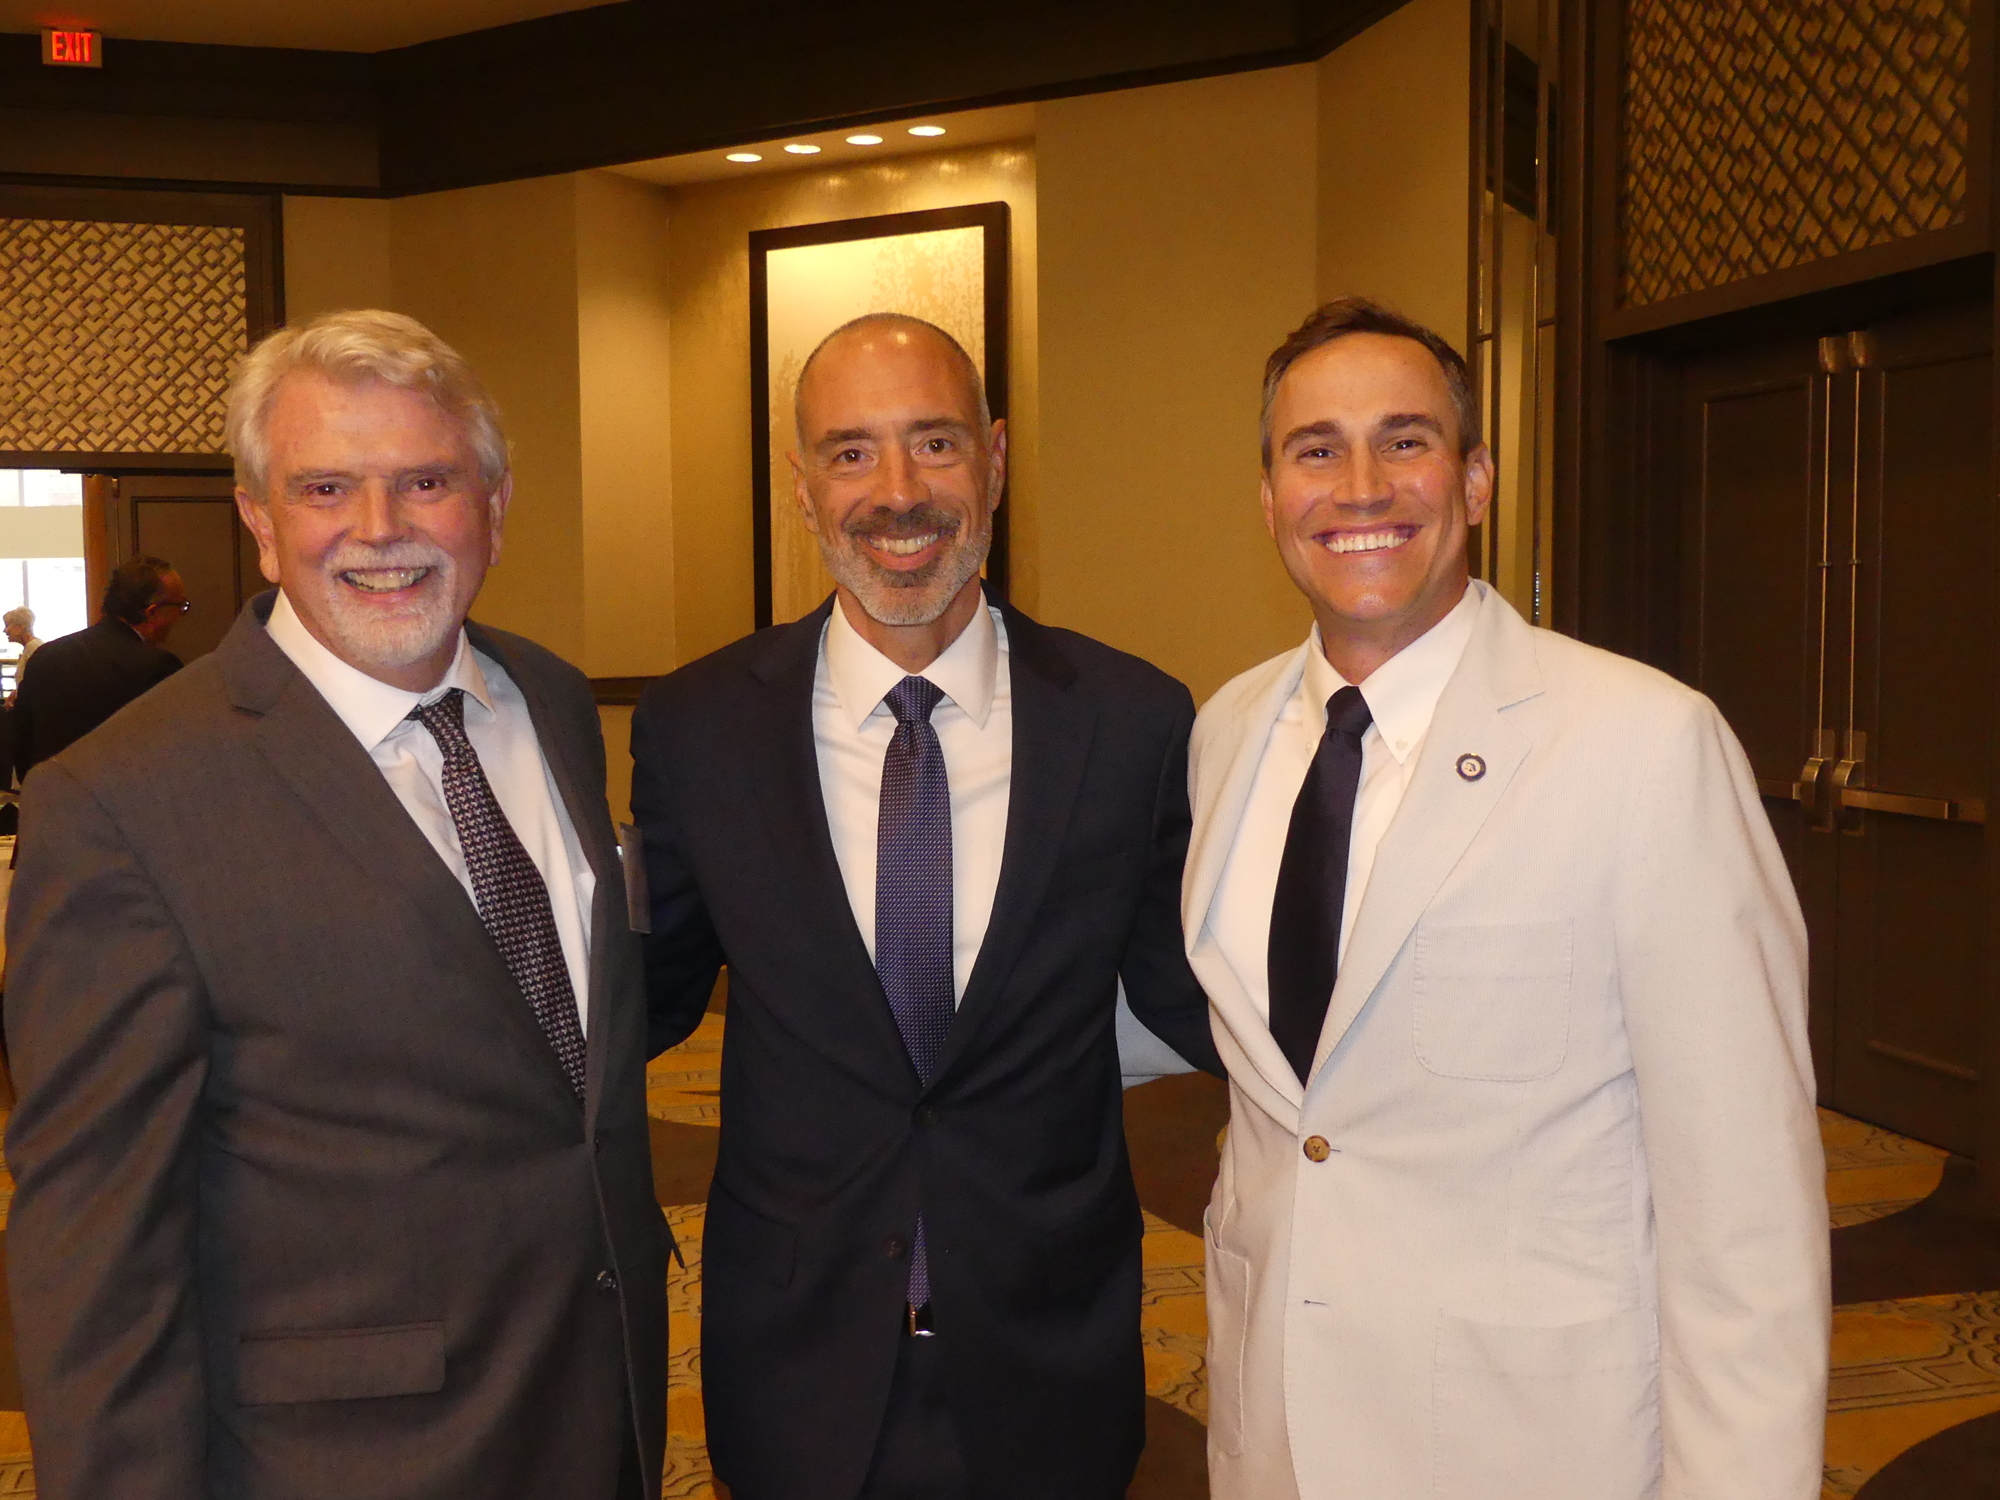 Fourth Judicial Circuit Chief Judge Mark Mahon, left, with state Supreme Court Justice Alan Lawson and Michael Fox Orr, 2021-22 president of the Jacksonville Bar Association.